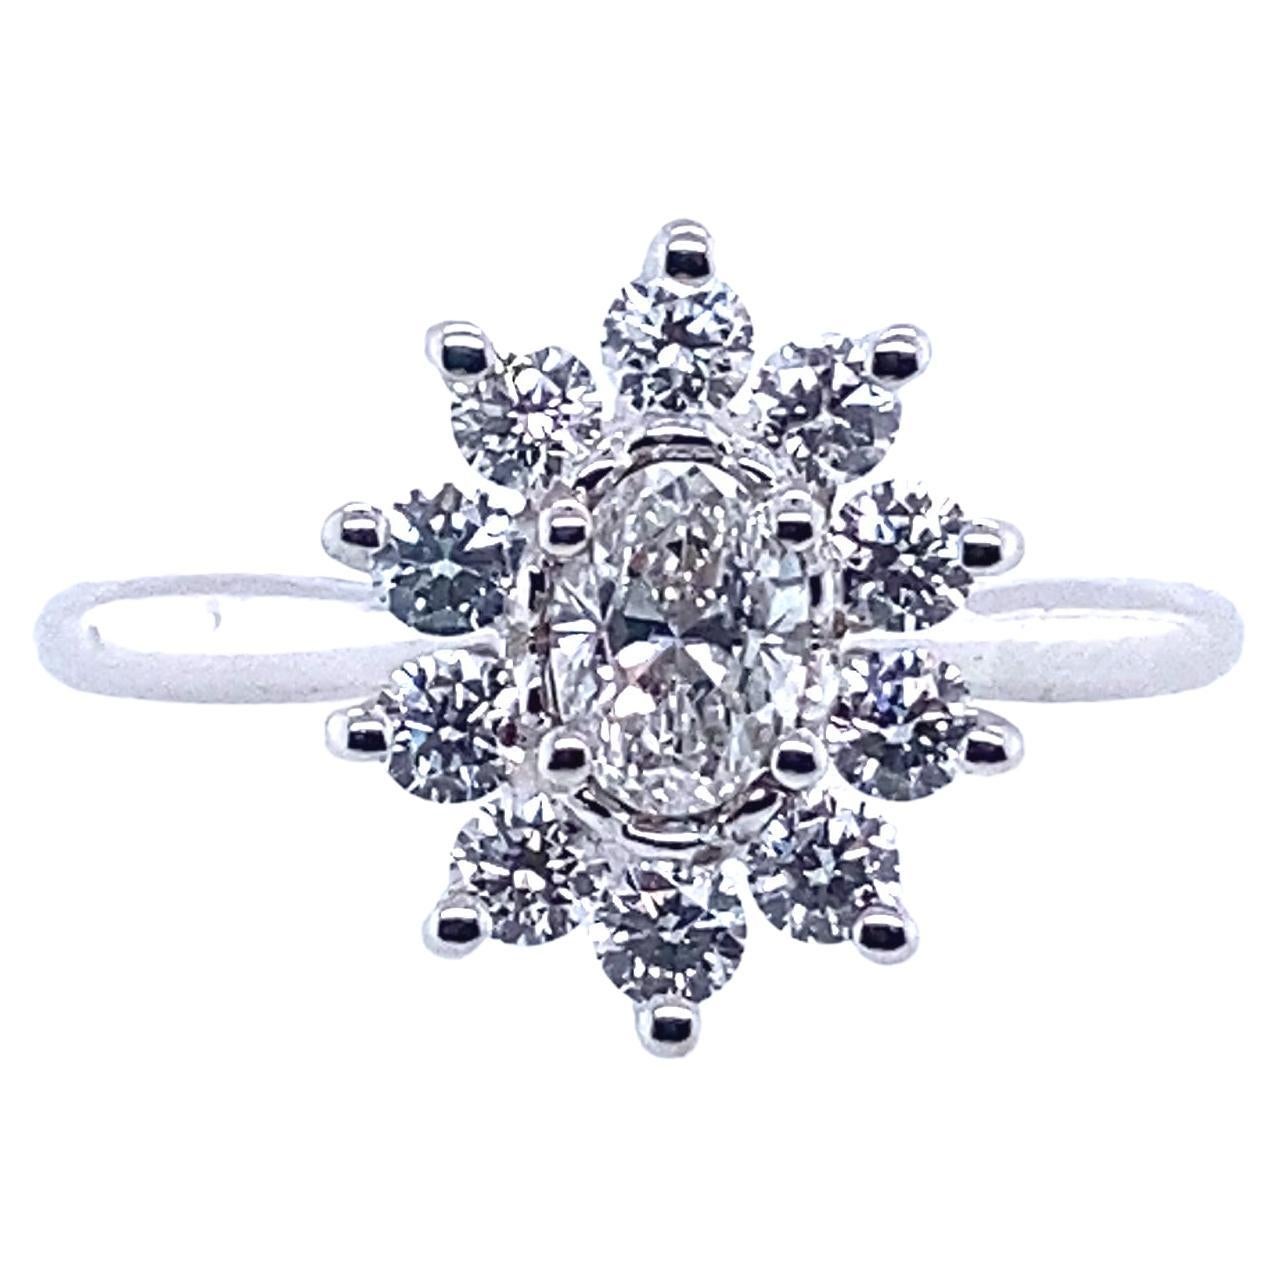 A magnificent engagement ring in white gold, an exquisite piece from the Mesure et Art du Temps French Collection that perfectly embodies the eternal symbol of love and commitment. This sumptuous ring is crafted with unrivalled expertise, testifying